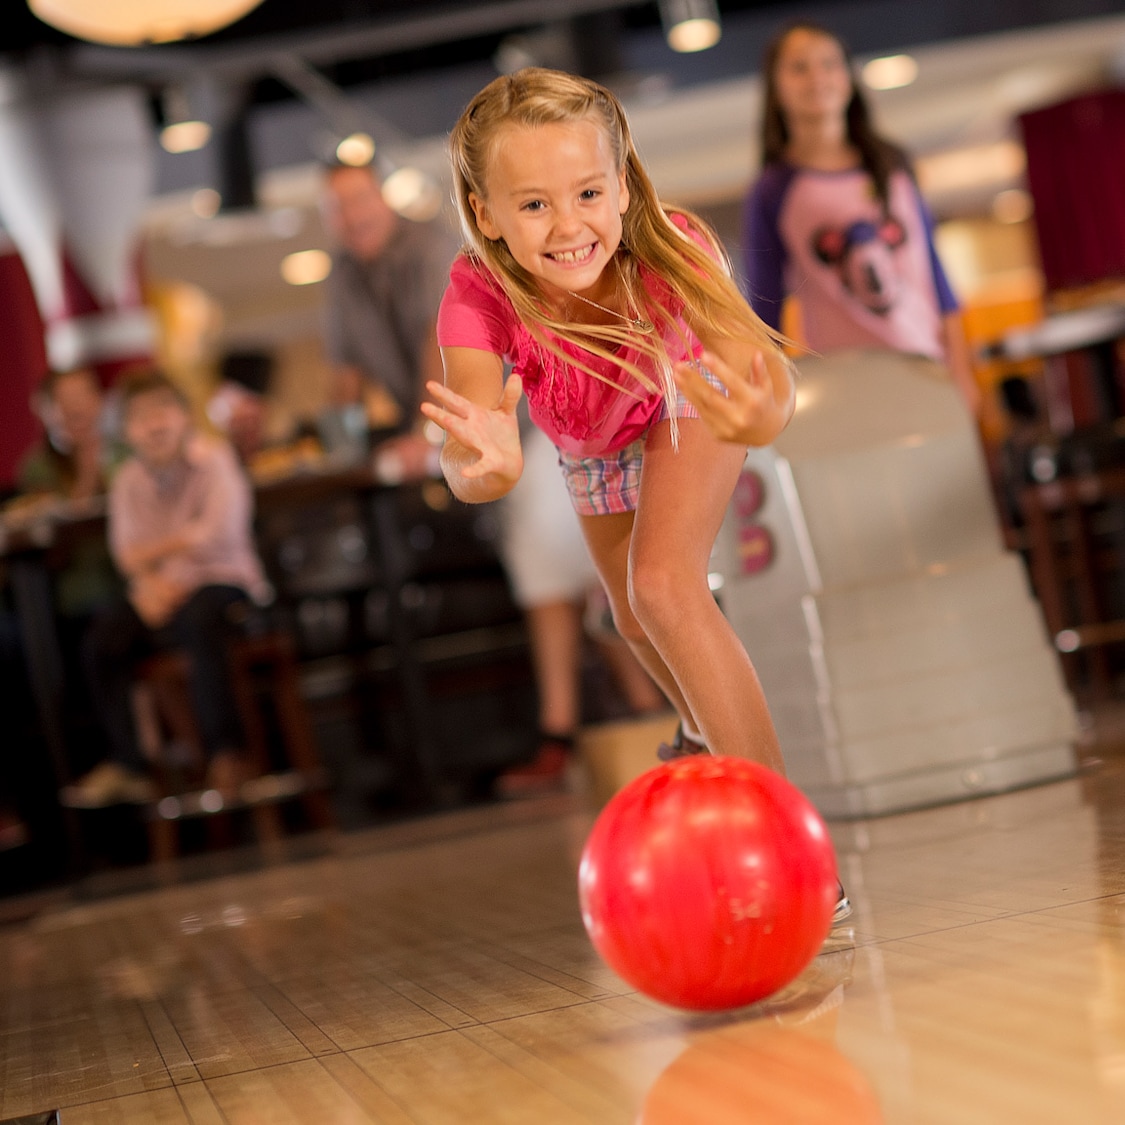 A smiling young girl bowls with both hands while her family watches in the background at Splitsville Luxury Lanes in Downtown Disney Area